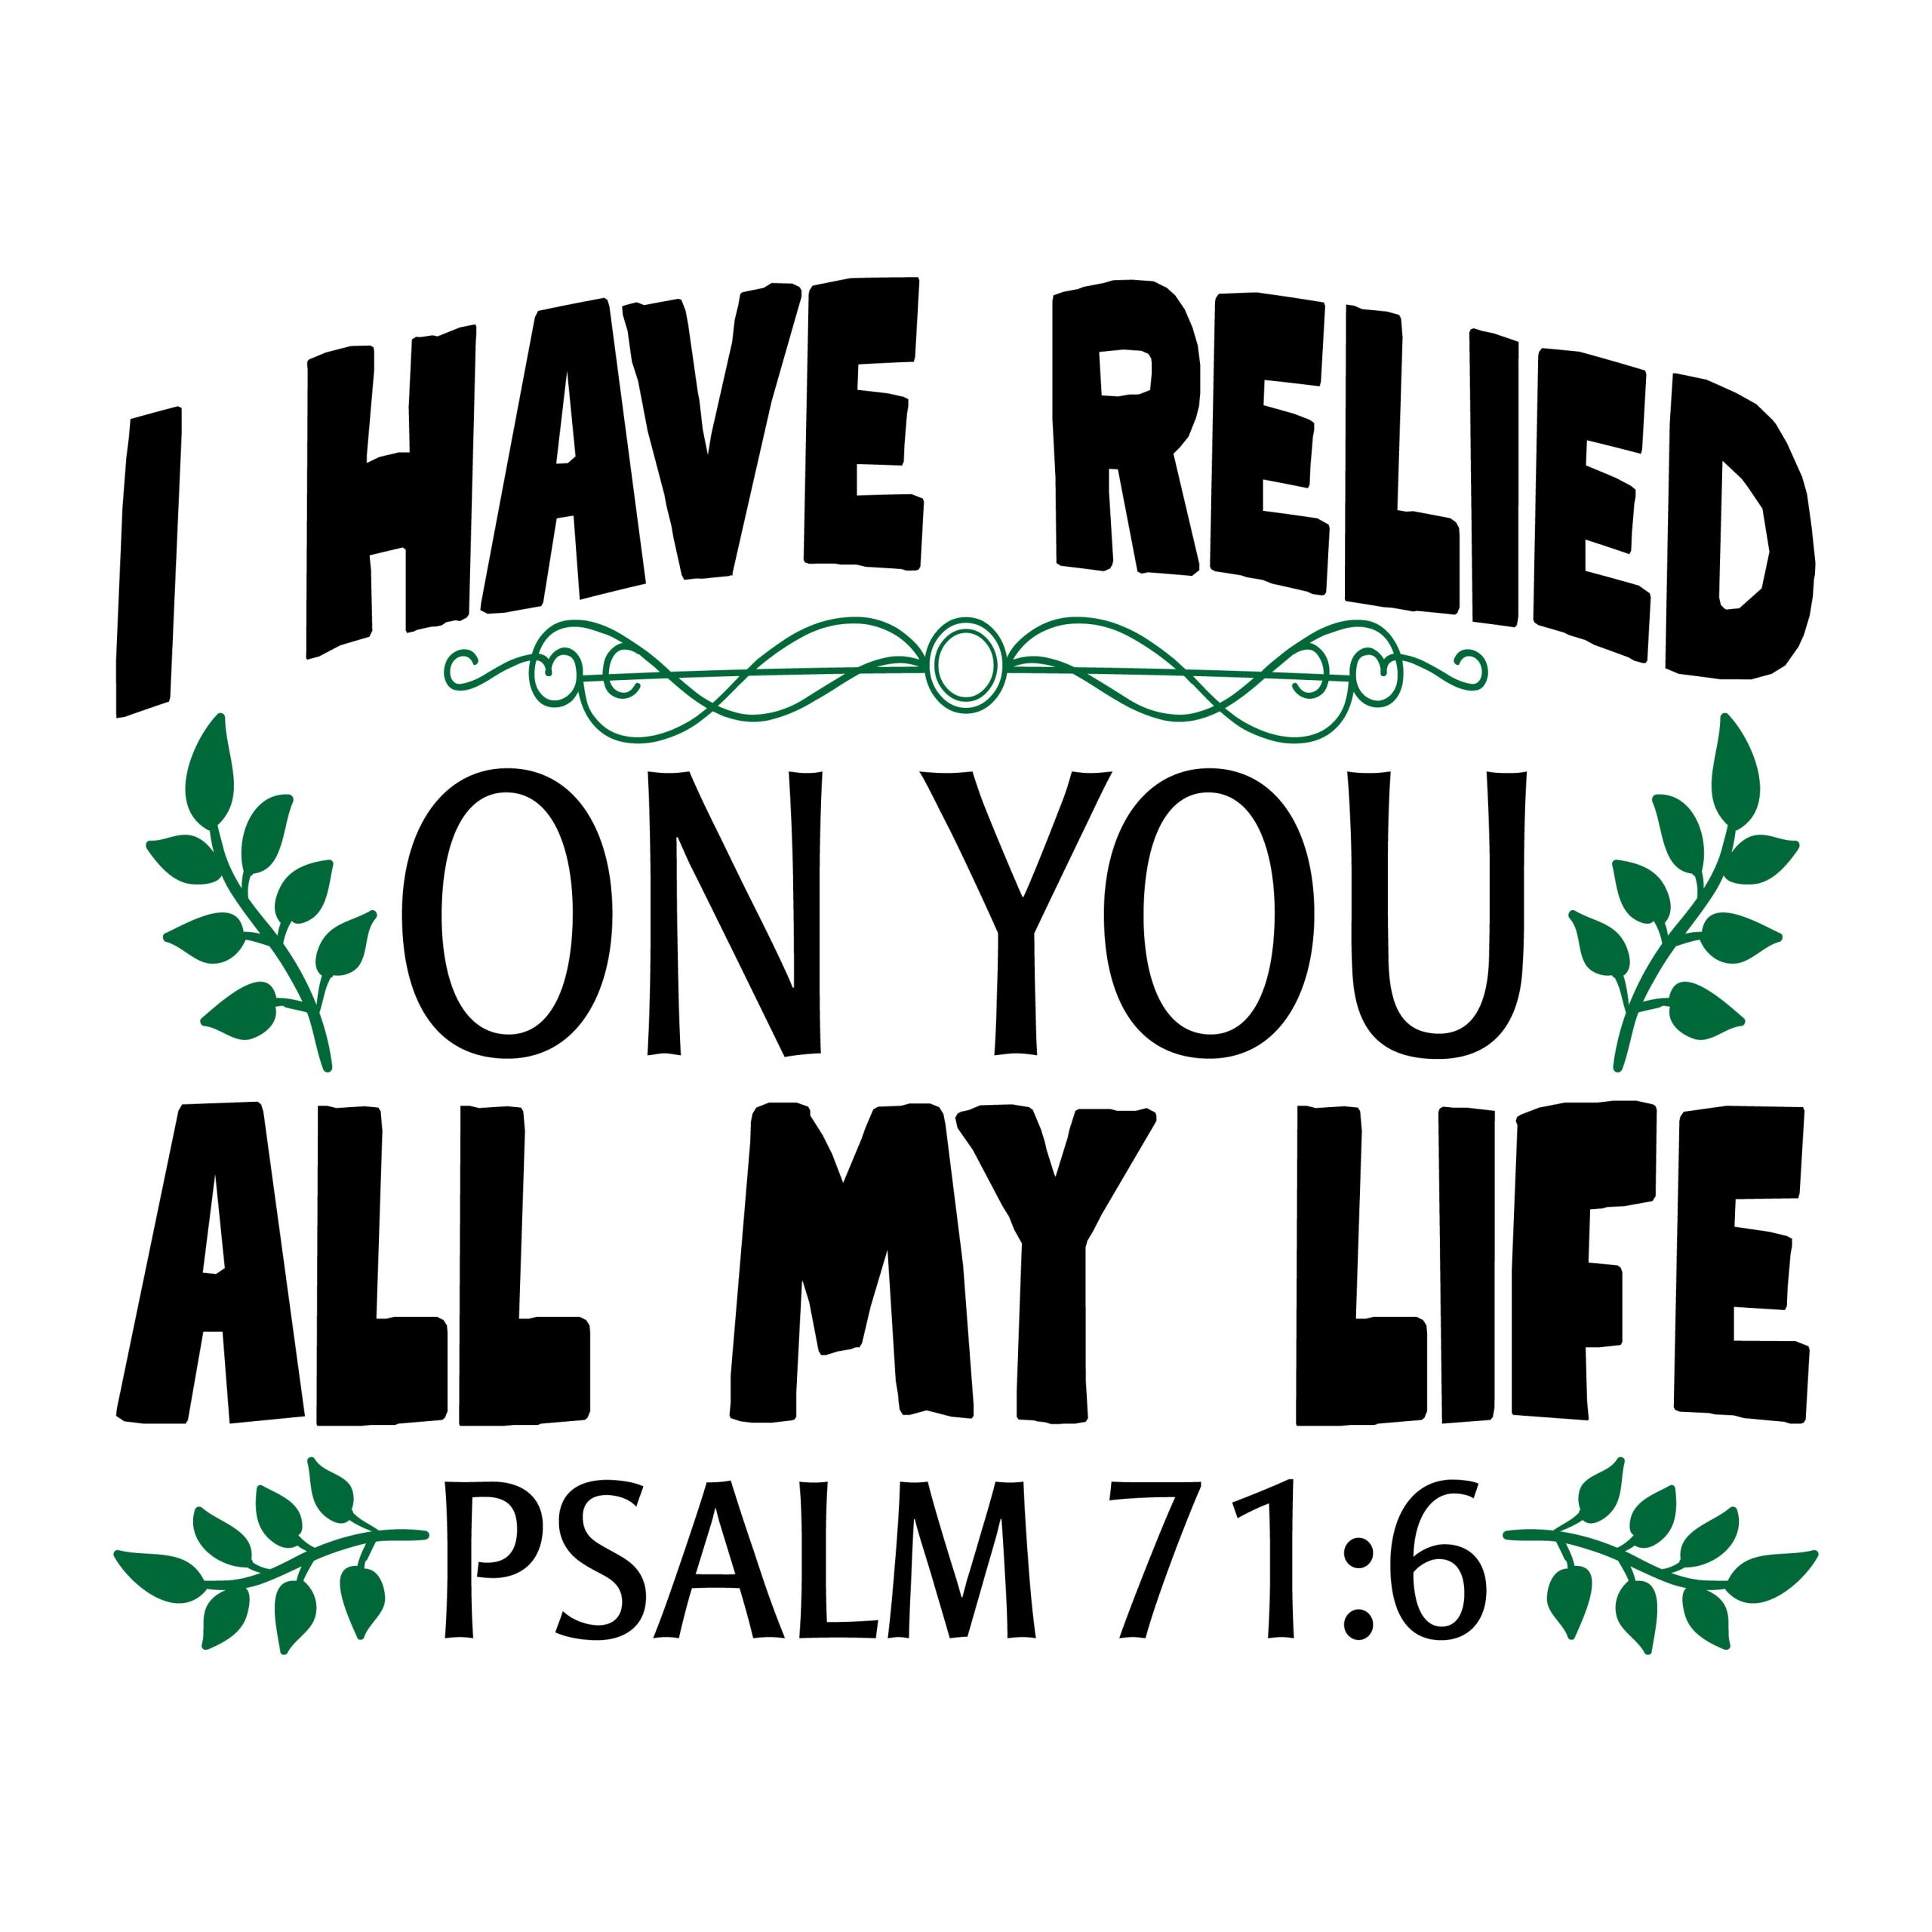 I have relied on you all my life Psalm 71:6, bible verses, scripture verses, svg files, passages, sayings, cricut designs, silhouette, embroidery, bundle, free cut files, design space, vector